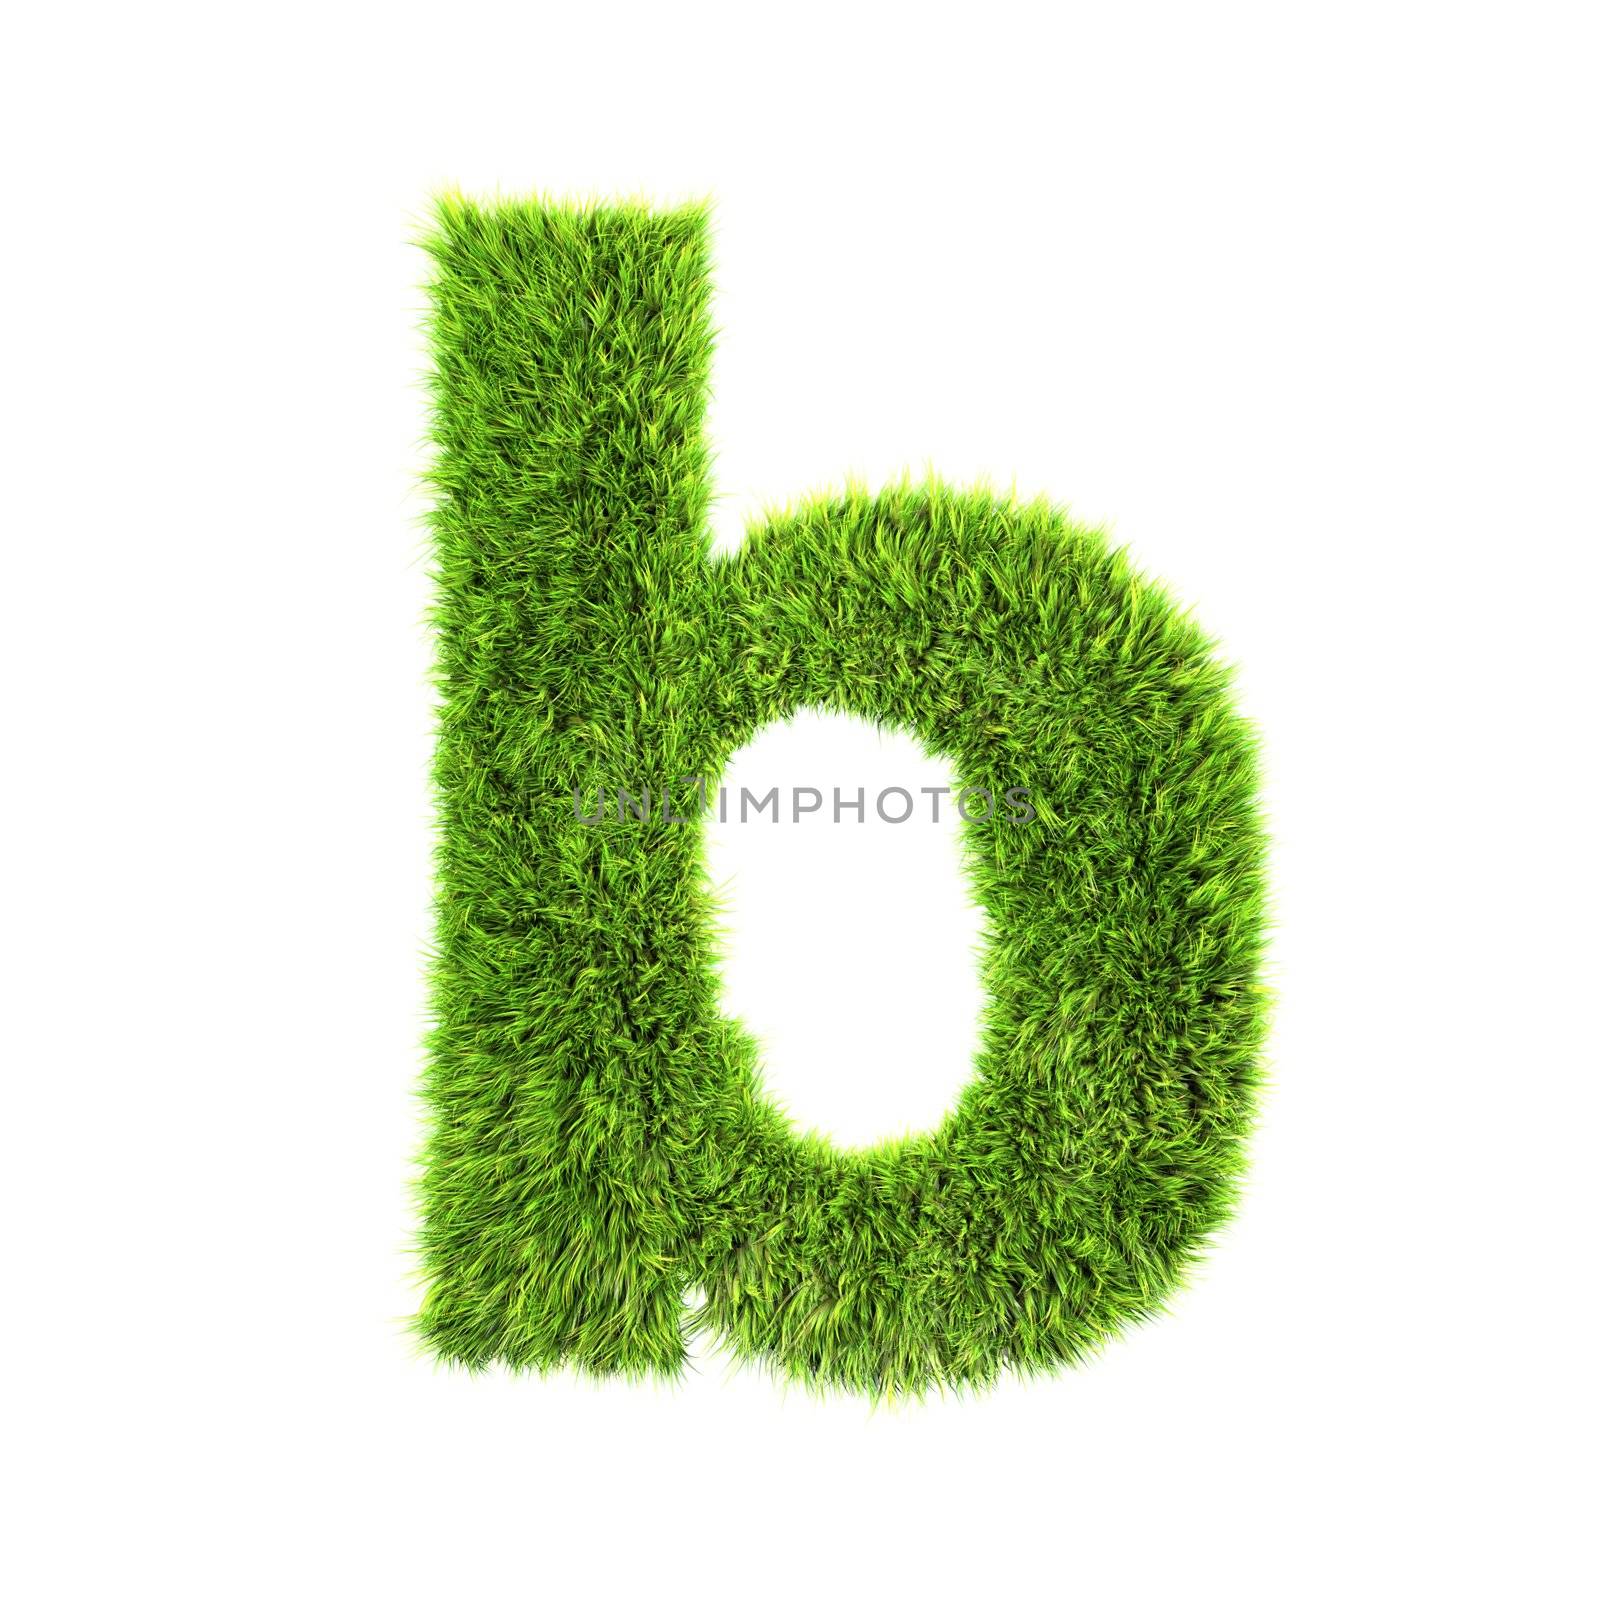 3d grass letter isolated on white background - b by chrisroll